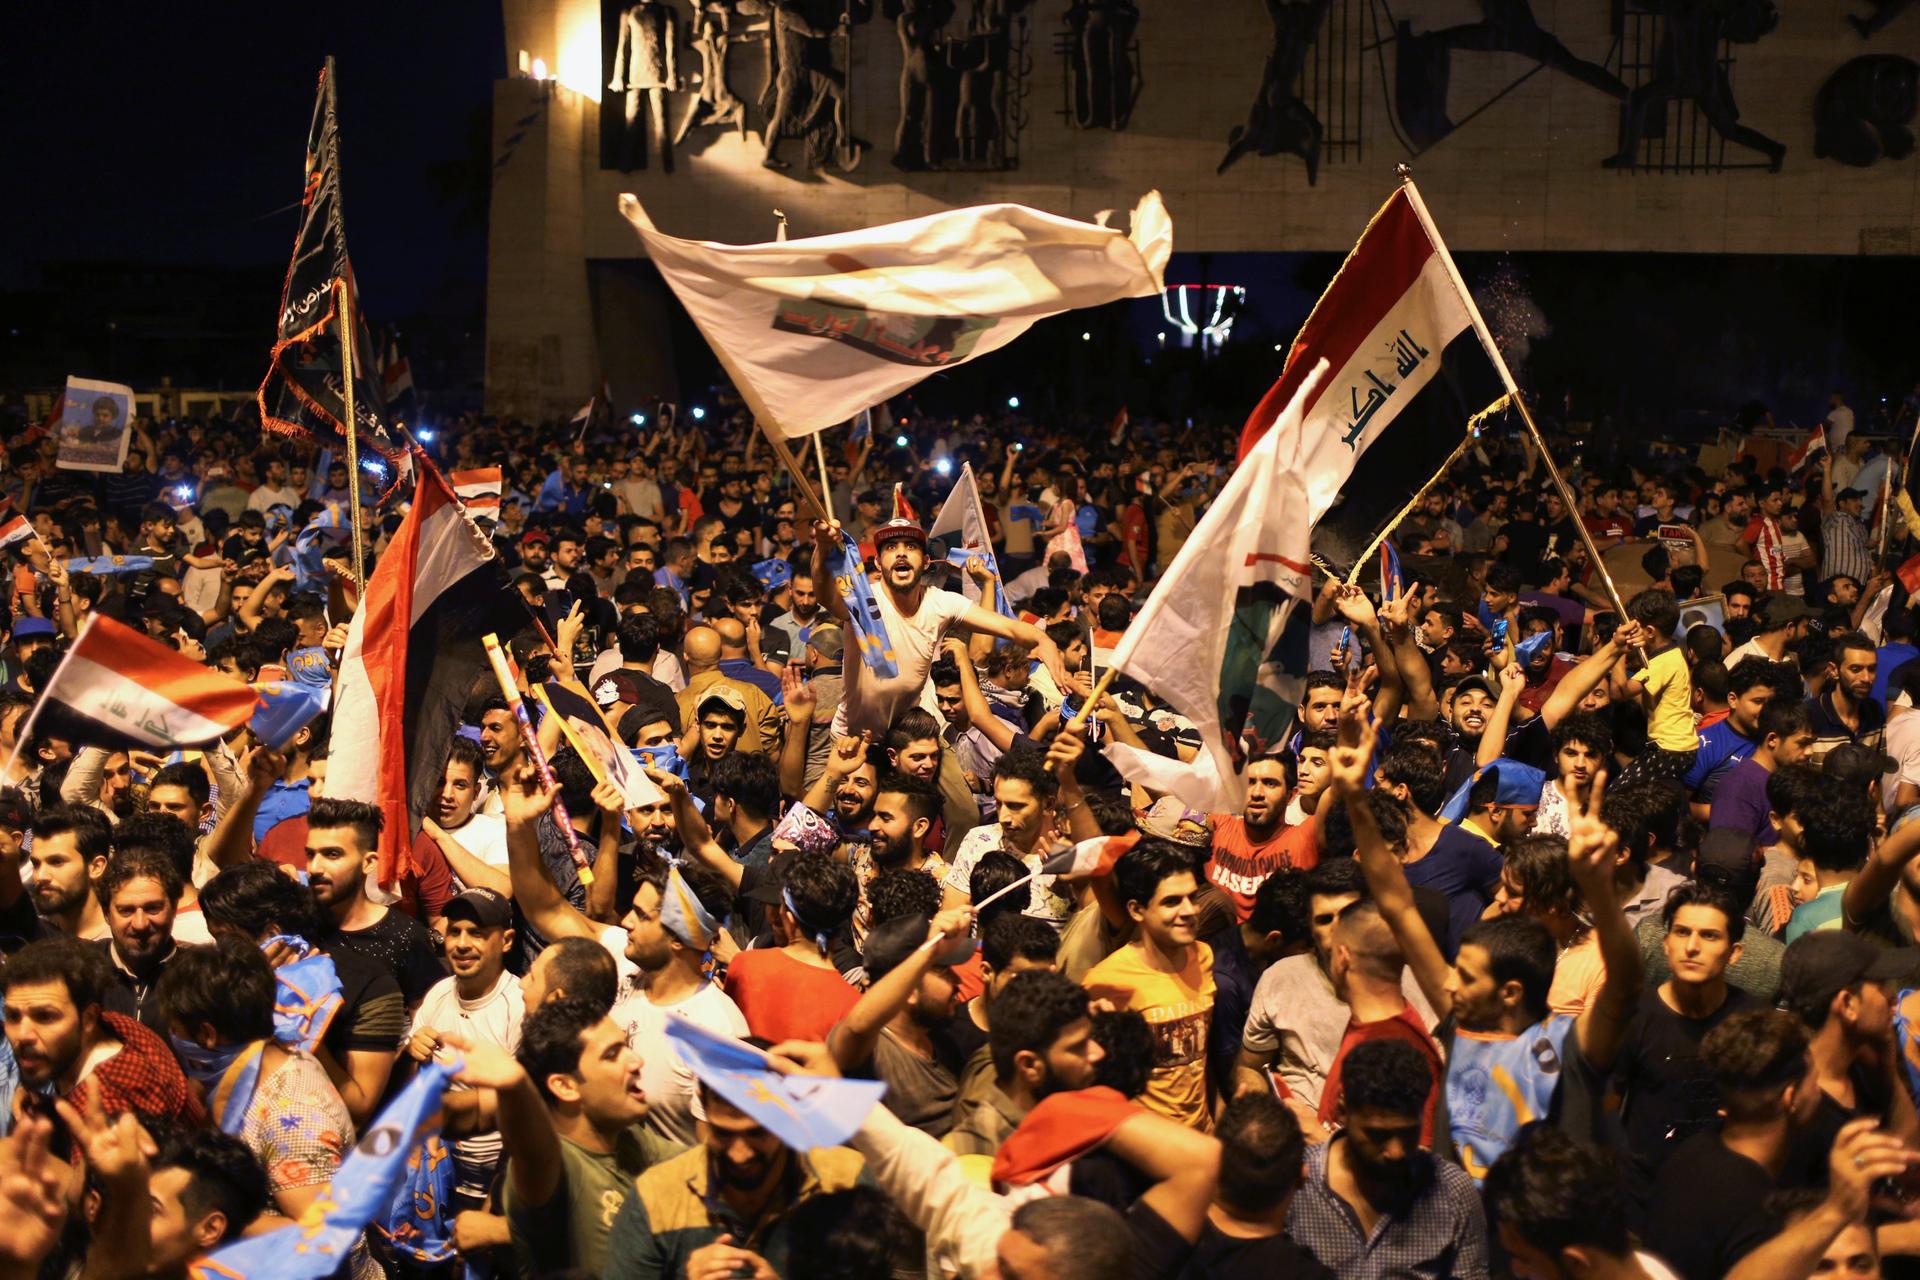 Iraqi supporters of cleric Moqtada al-Sadr's Sairun coalition celebrate after results of Iraq's parliamentary election were announced in Baghdad, Iraq, on May 14, 2018.